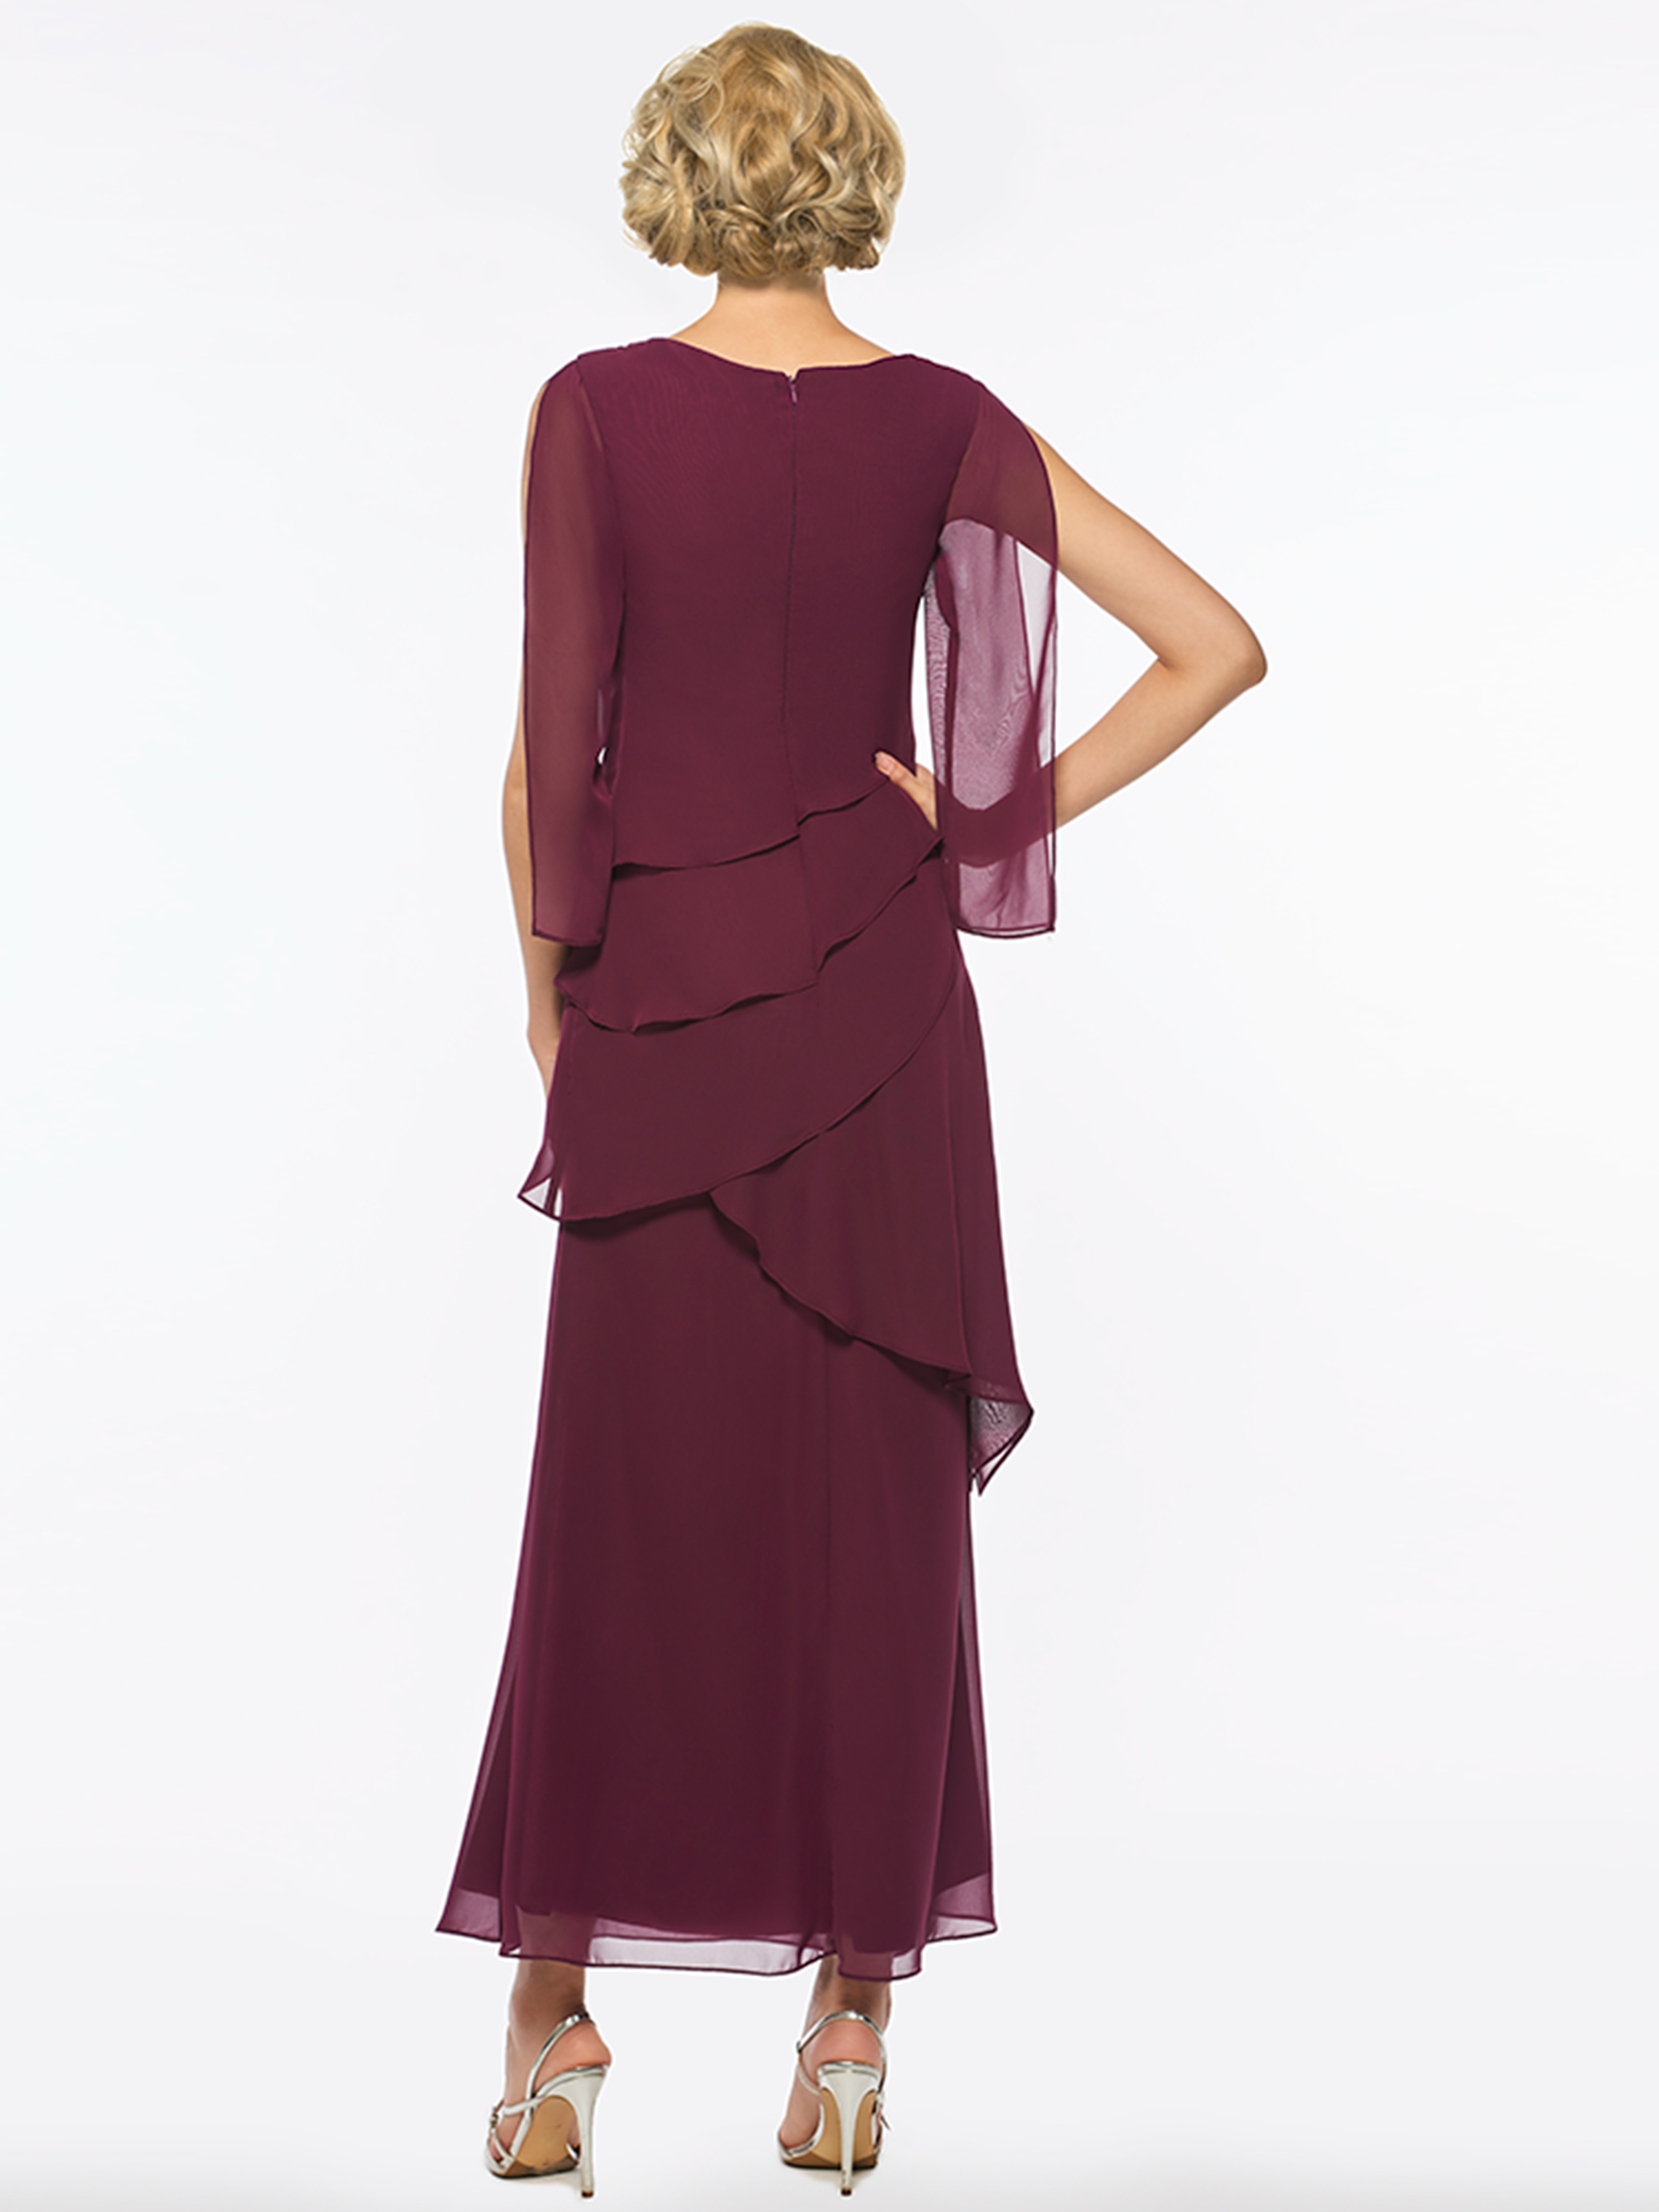 Ankle-Length Bateau A-Line 3/4 Length Sleeves Evening Dress Mother Of The Bride Dress